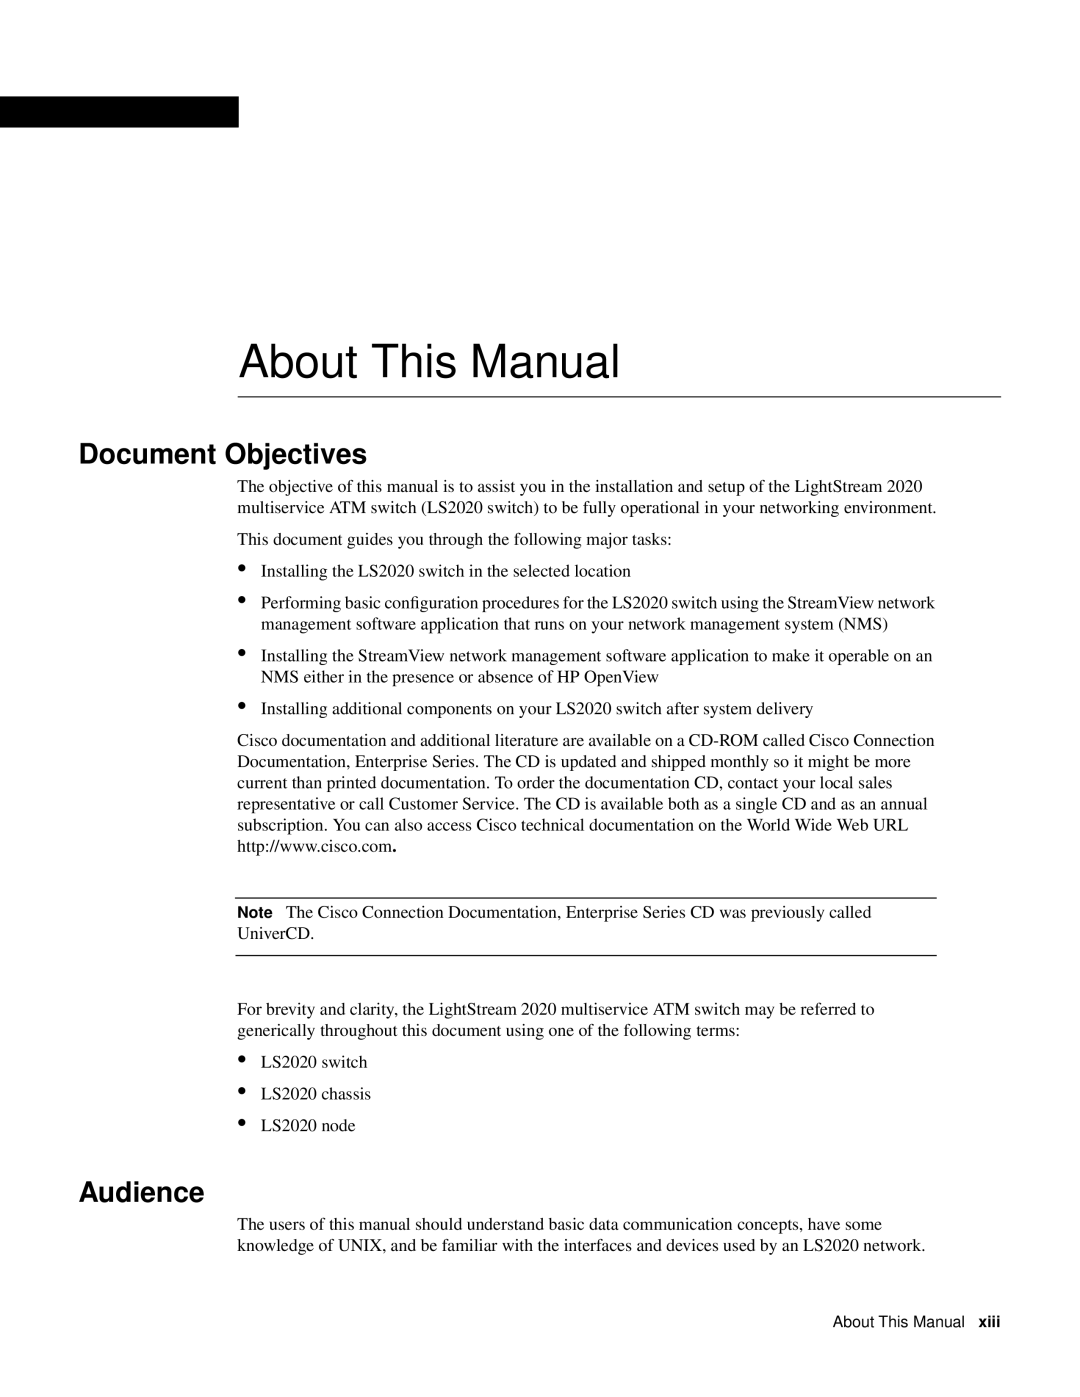 Cisco Systems LS2020 manual Document Objectives, Audience, About This Manual 